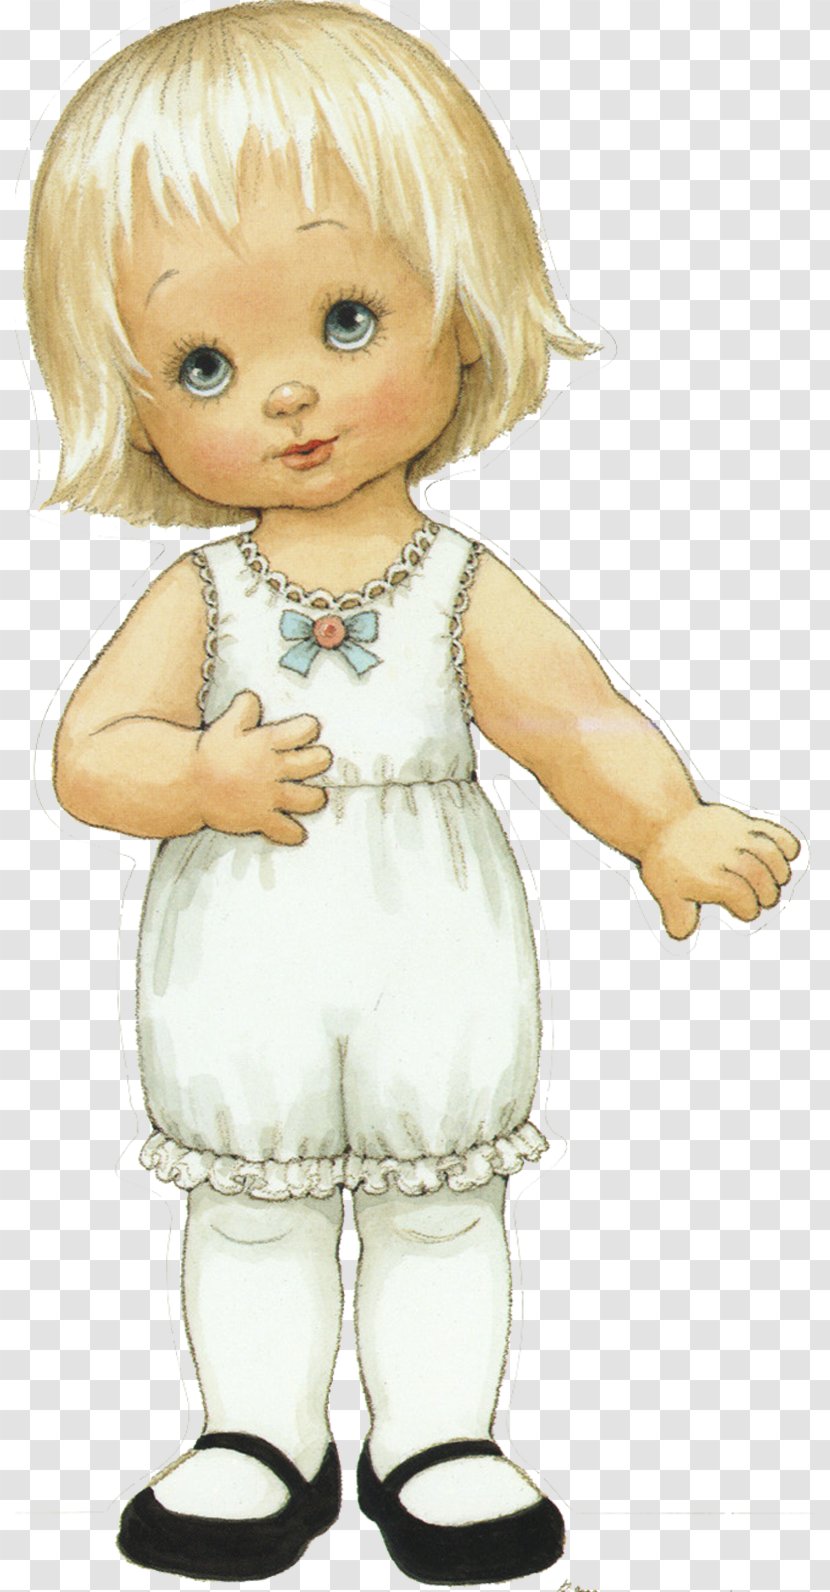 Paper Doll Toy Child - Frame - Friends Transparent PNG